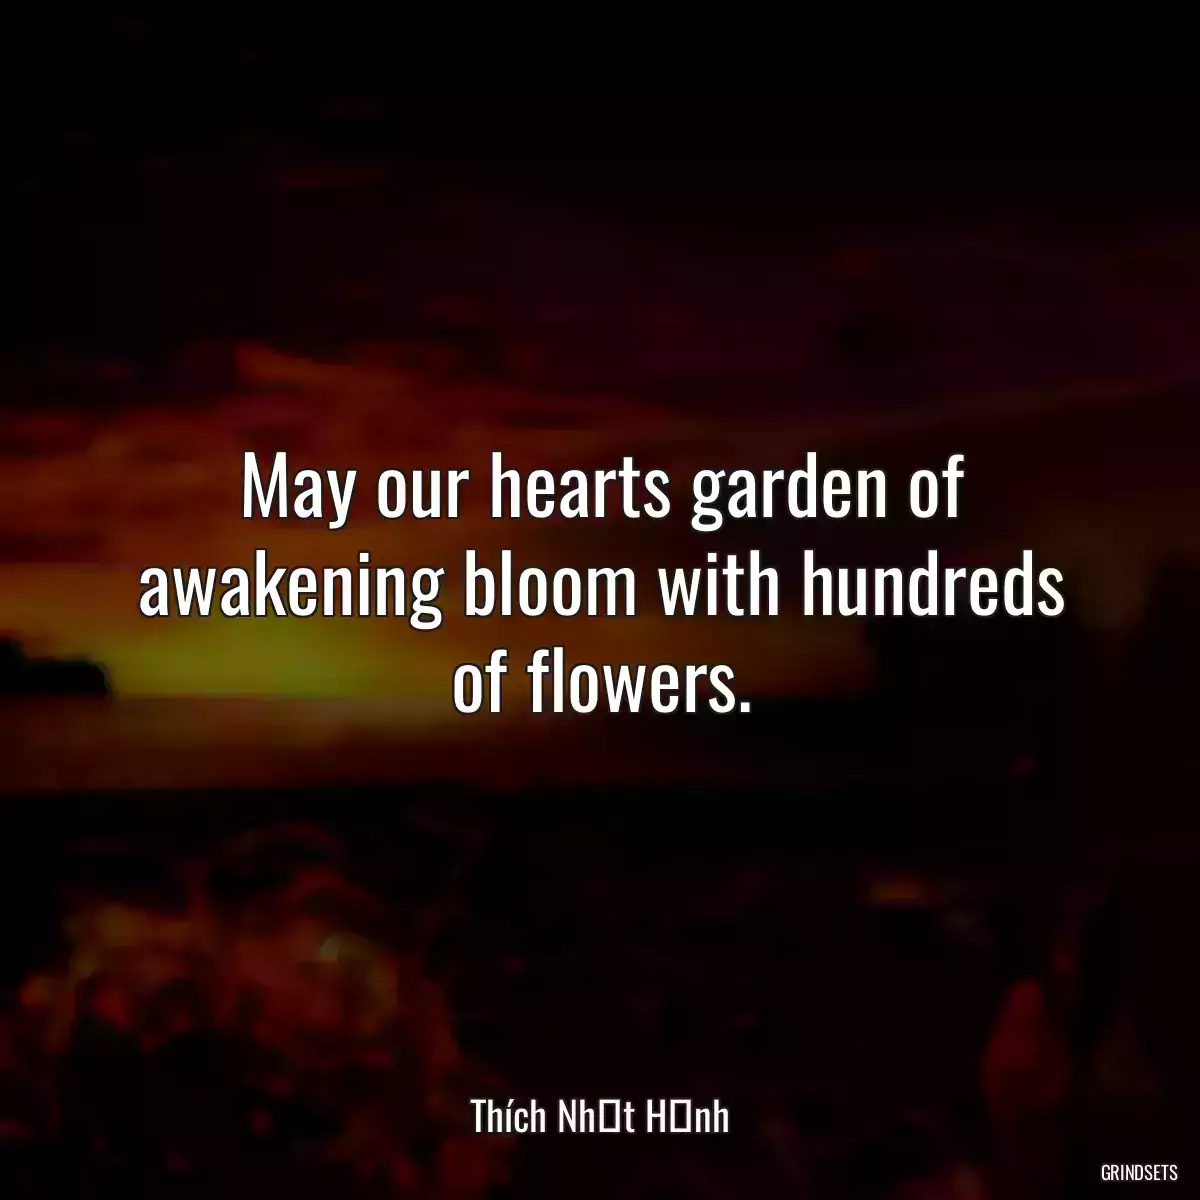 May our hearts garden of awakening bloom with hundreds of flowers.